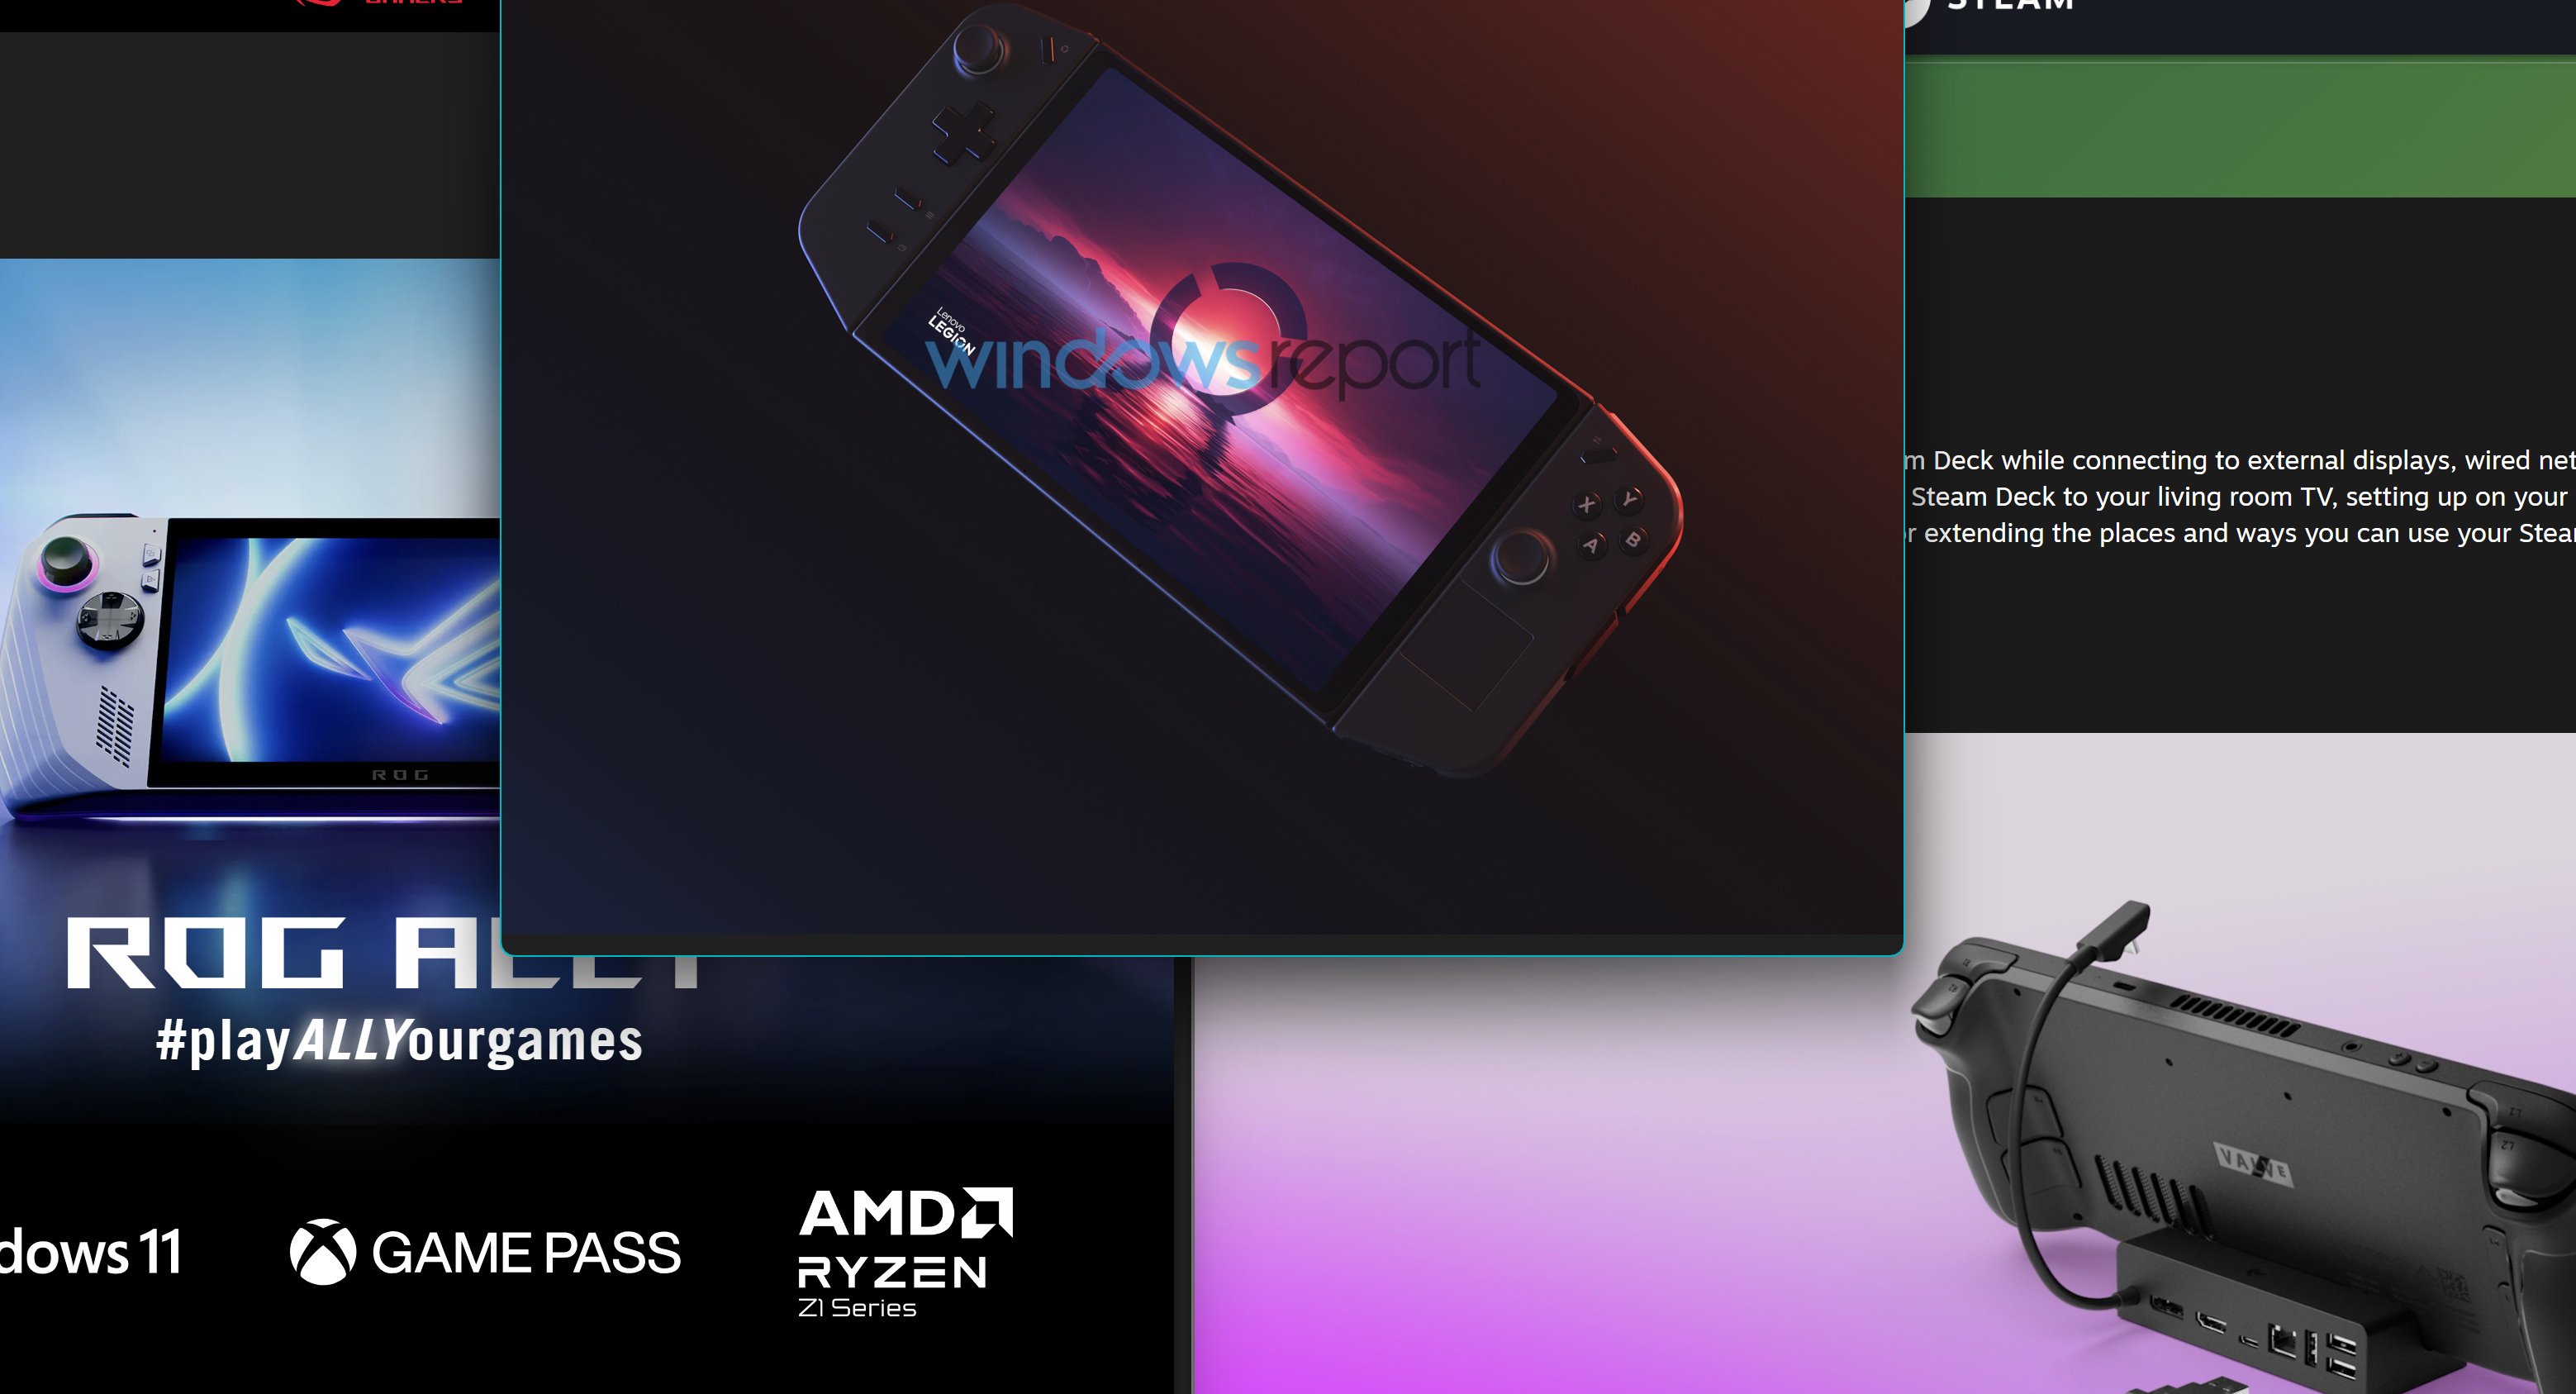 How the Asus ROG Ally stacks up to the Steam Deck and other gaming